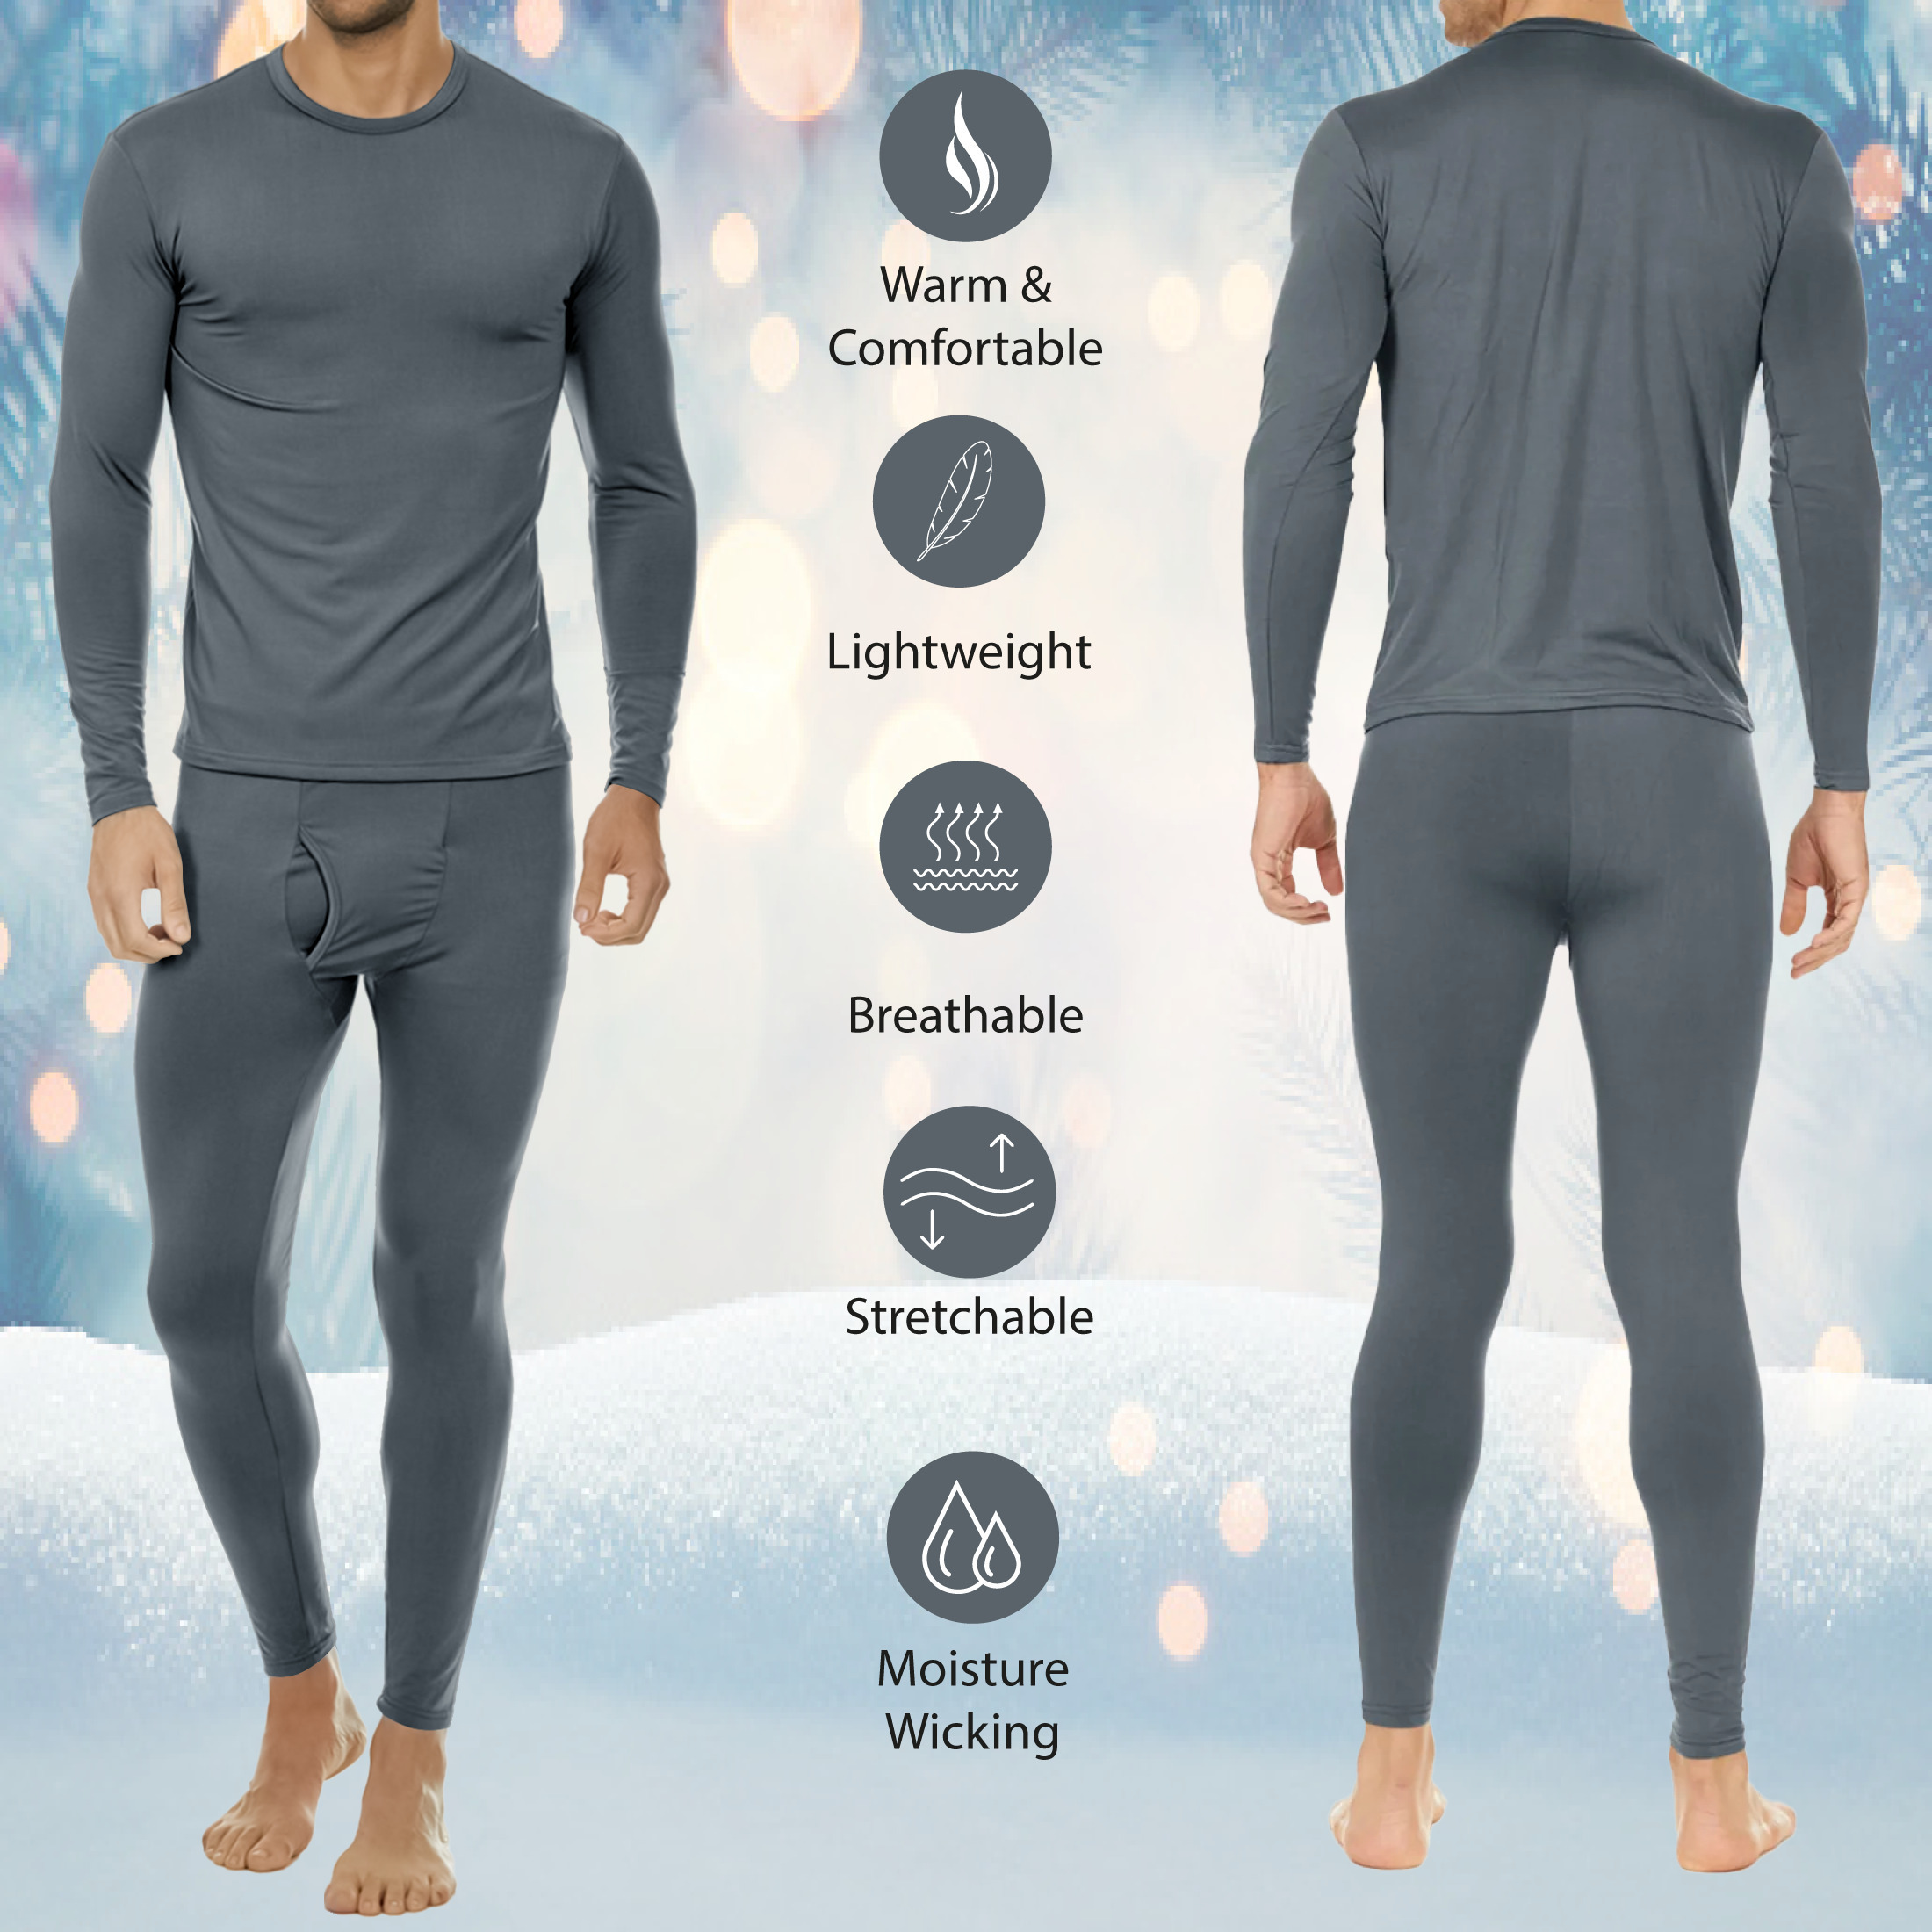 4-Piece: Men's Fleece Lined Thermal Set For Cold Weather - Large